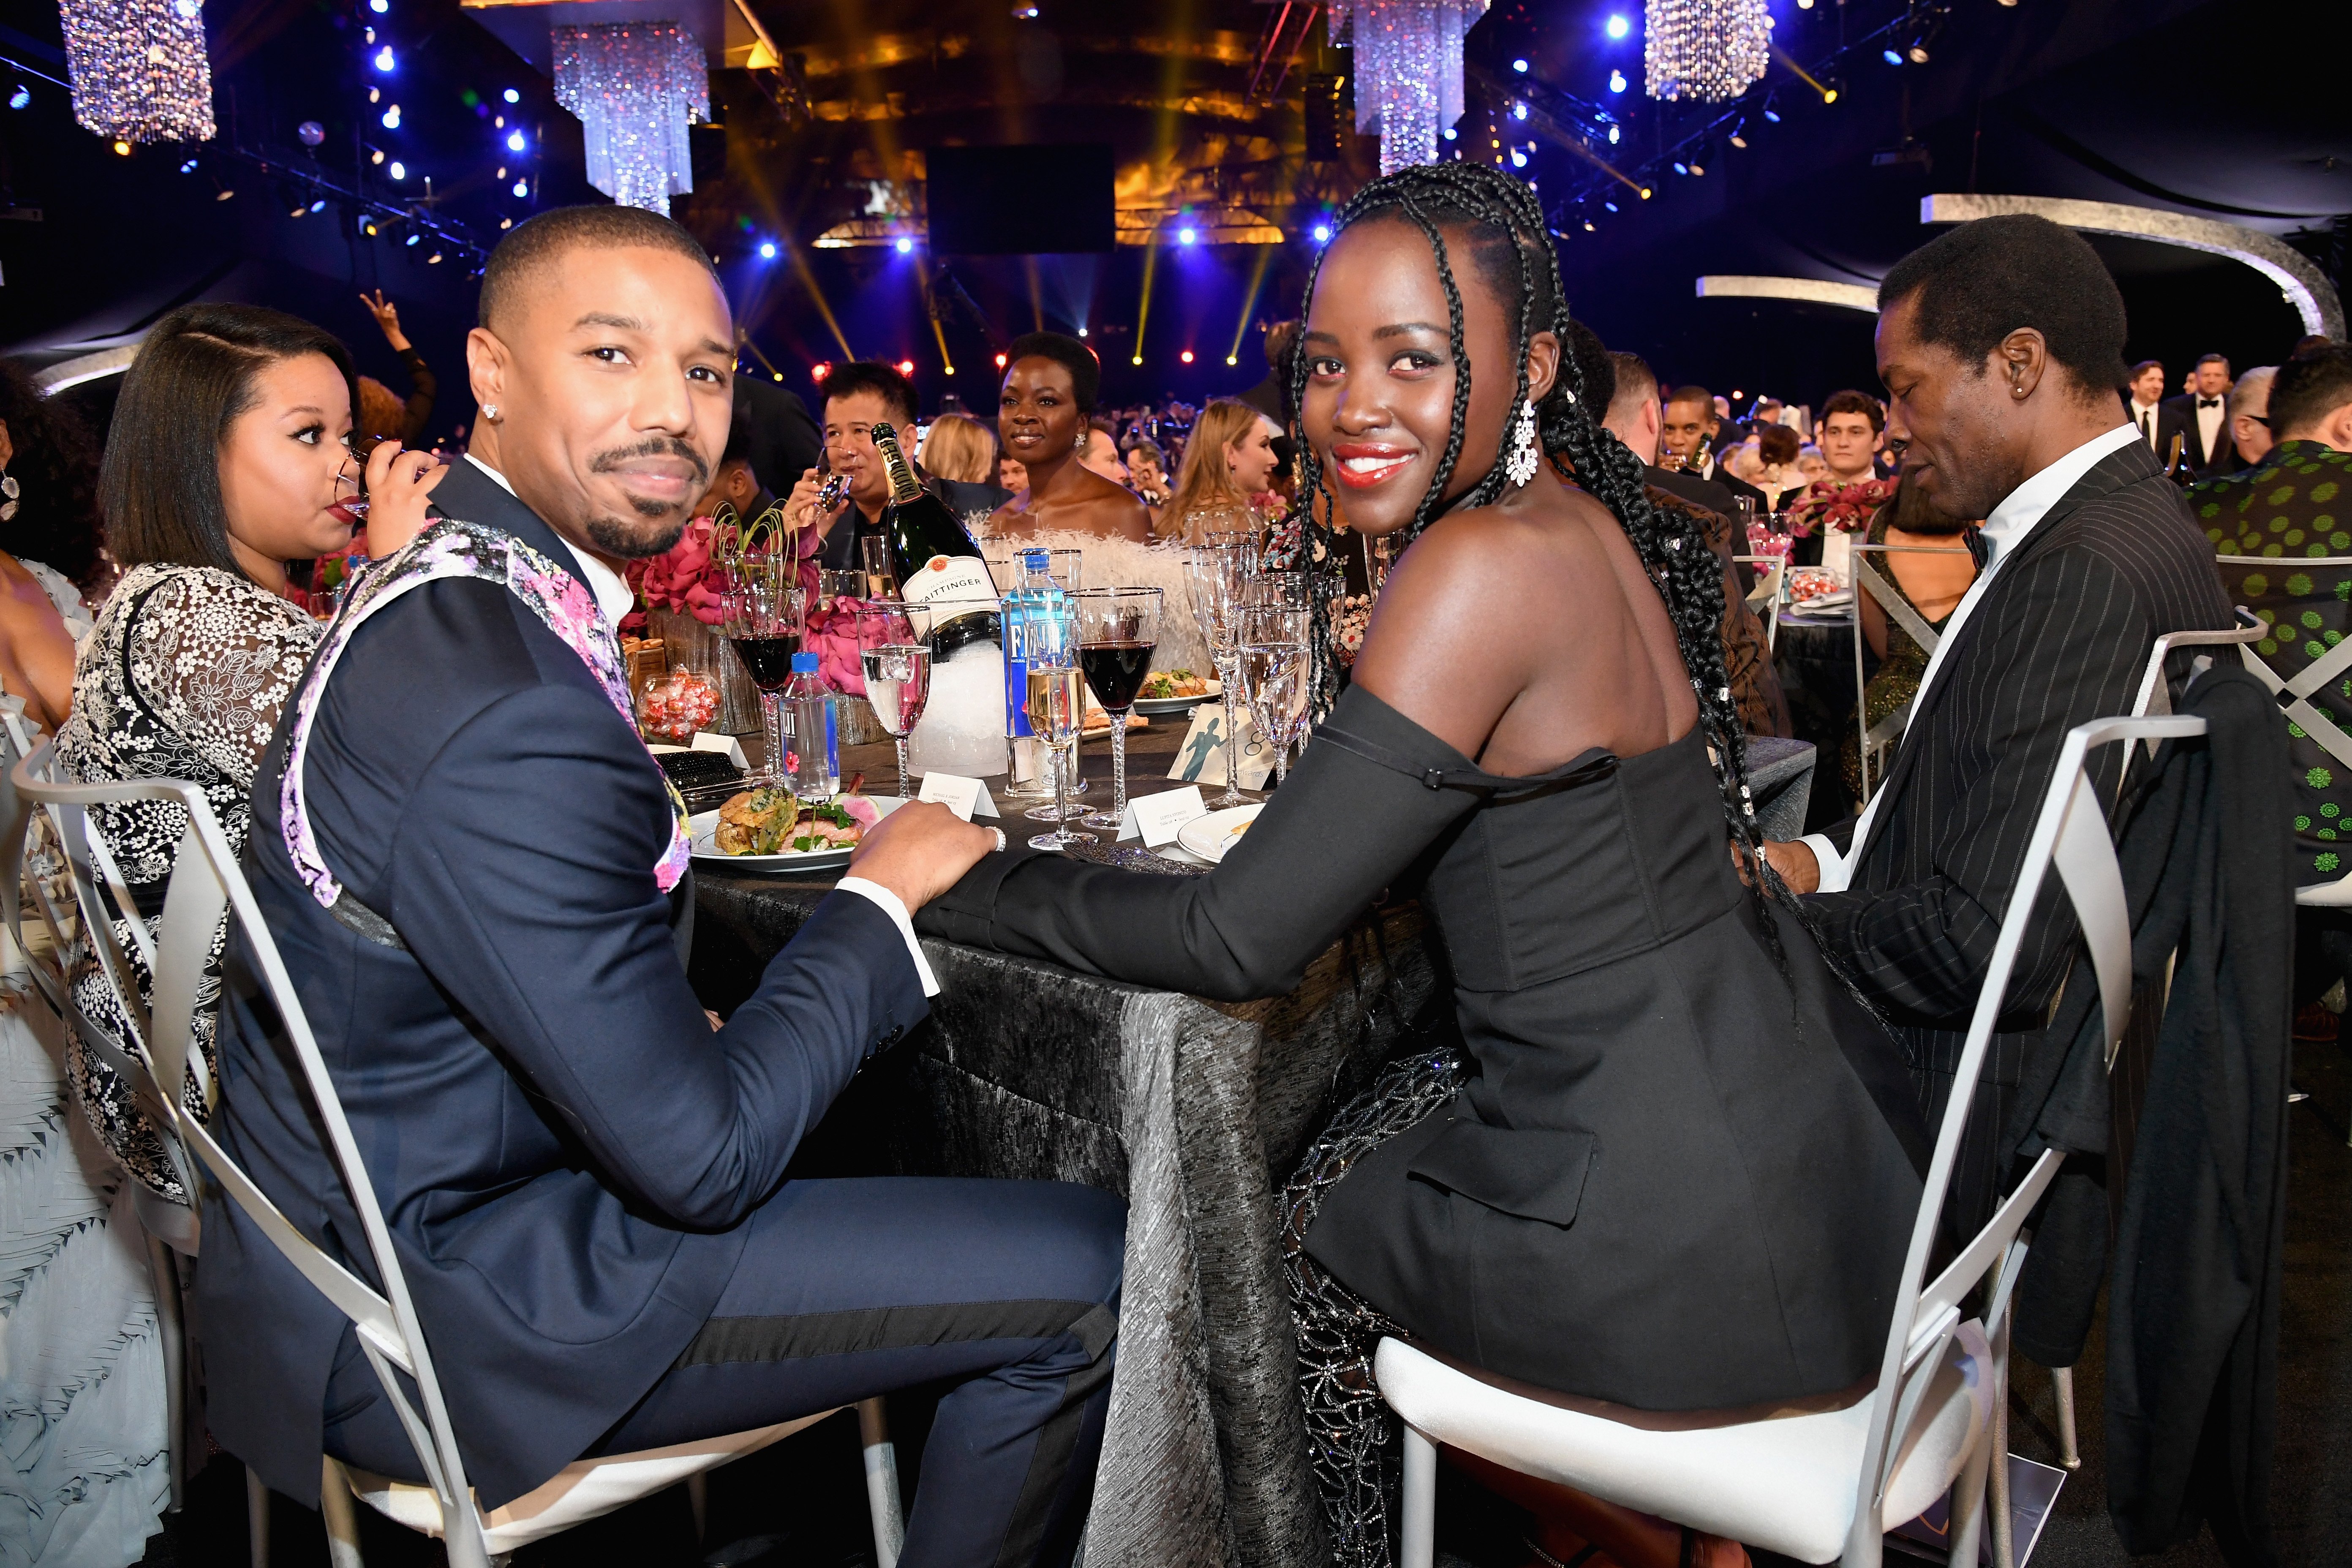 Michael B Jordan and Lupita Nyong'o attend the Annual Screen Actors Guild Awards in Los Angeles on January 27, 2019 | Photo: Getty Images